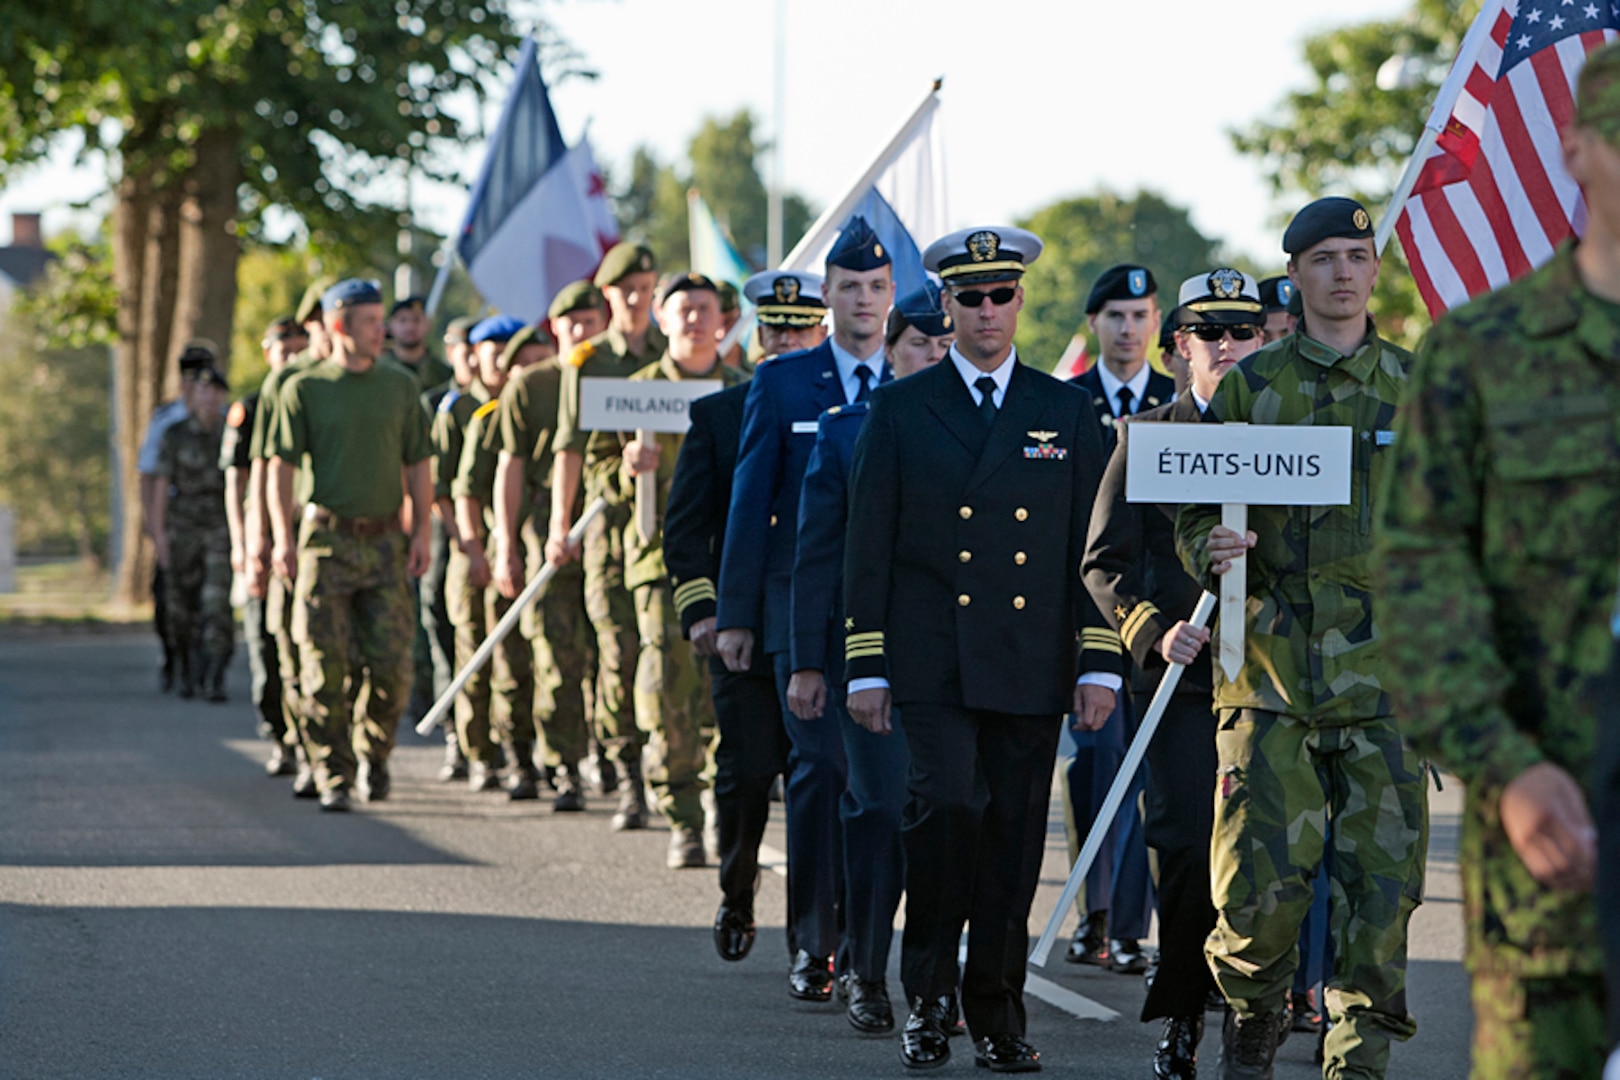 The U.S. Orienteering Team marches in at the opening ceremonies of the 2013 CISM Orienteering World Military Championship hosted by the Swedish Armed Forces in Eksjo, Sweden 26 Aug-1 Sep.